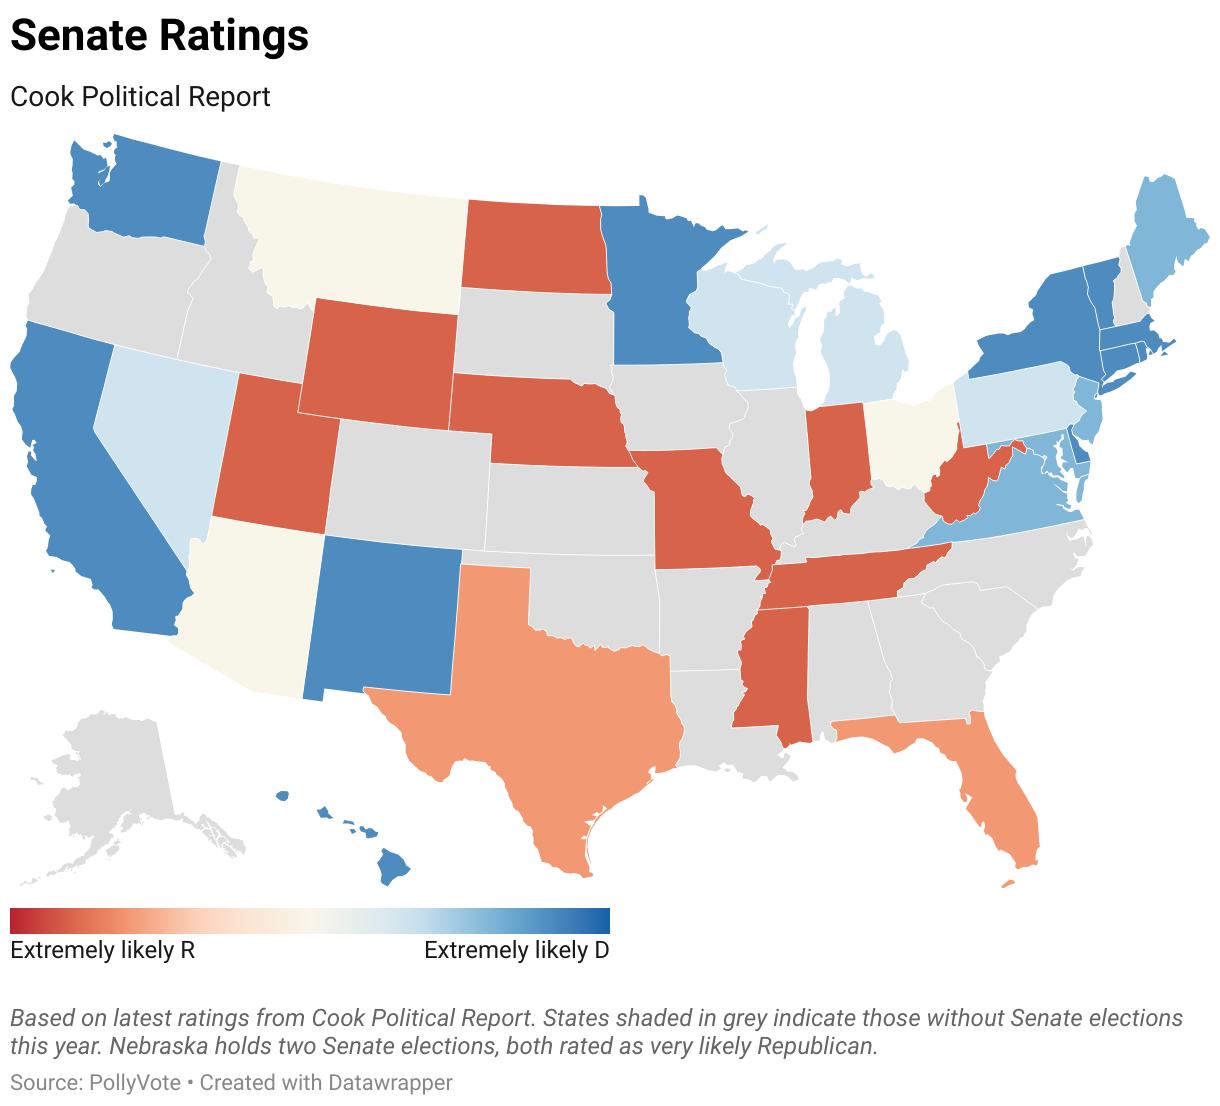 Senate Map based on Cook Political Report